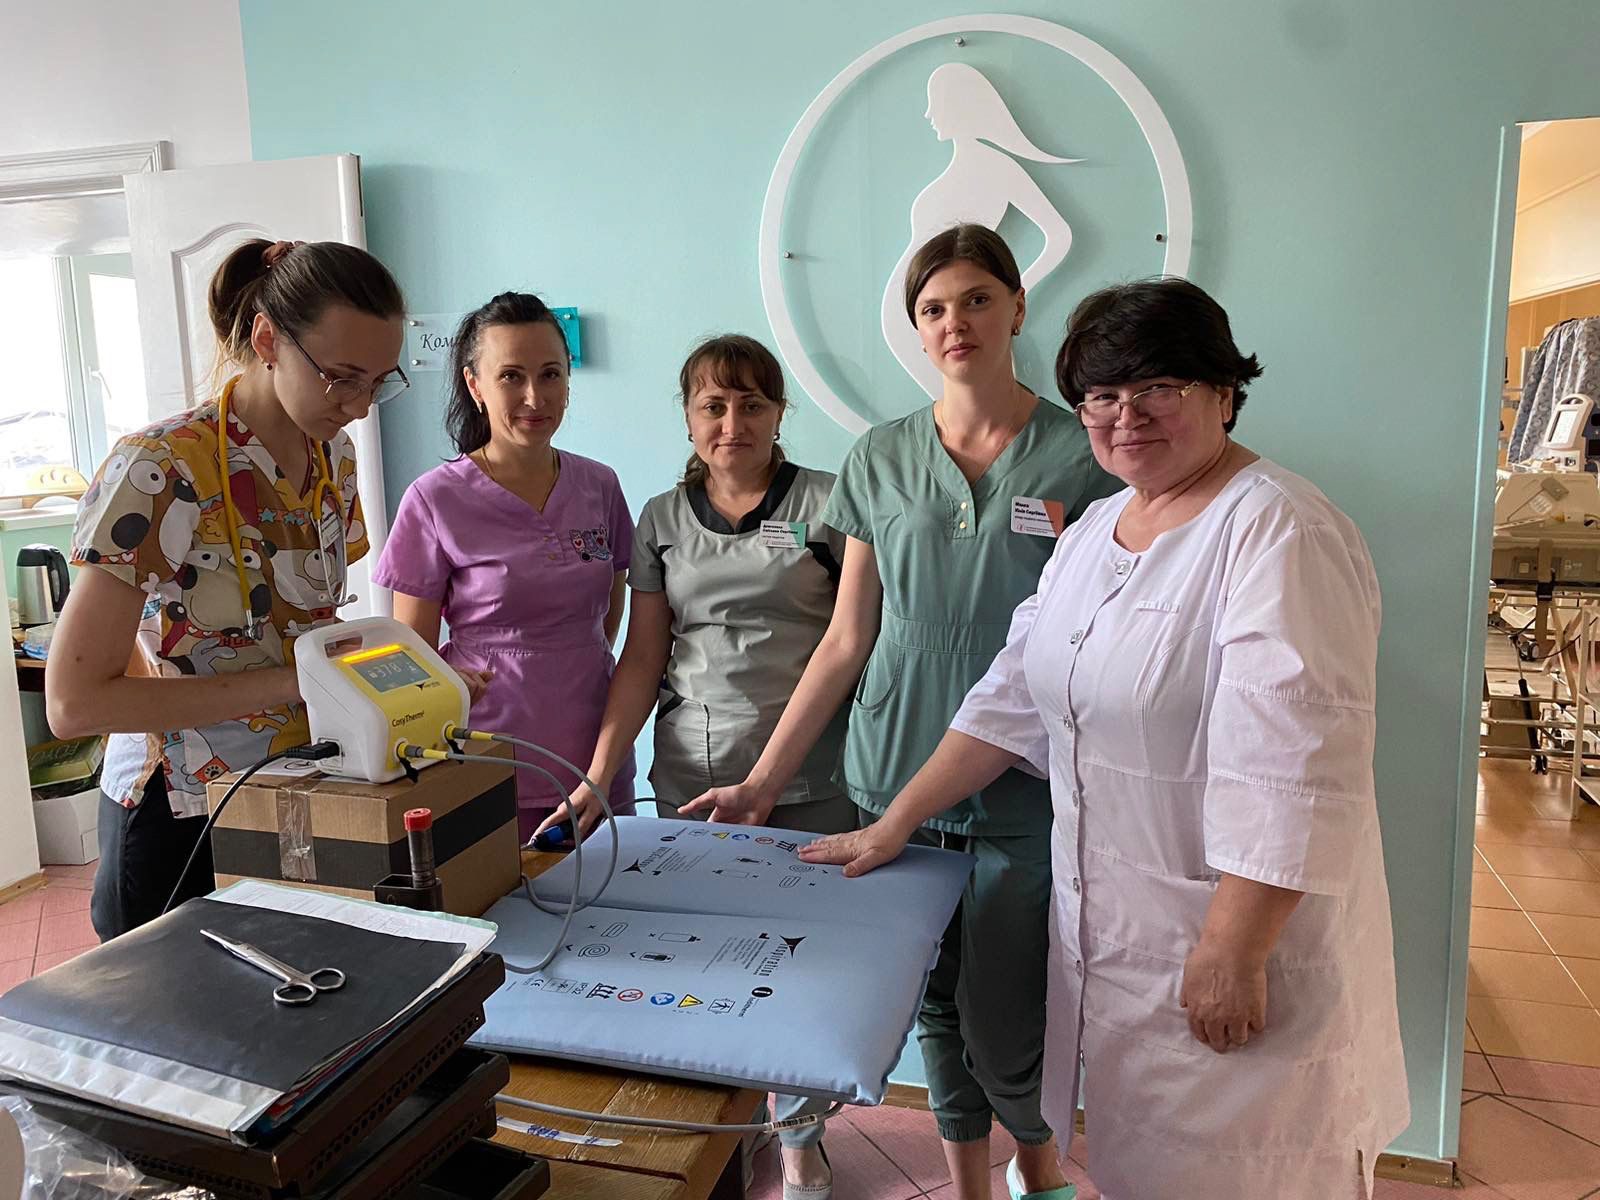 Assistance to maternity hospitals from the Victor Pinchuk Foundation and the Svyatoslav Vakarchuk charitable foundation as part of the Ukraine Relief Fund initiative